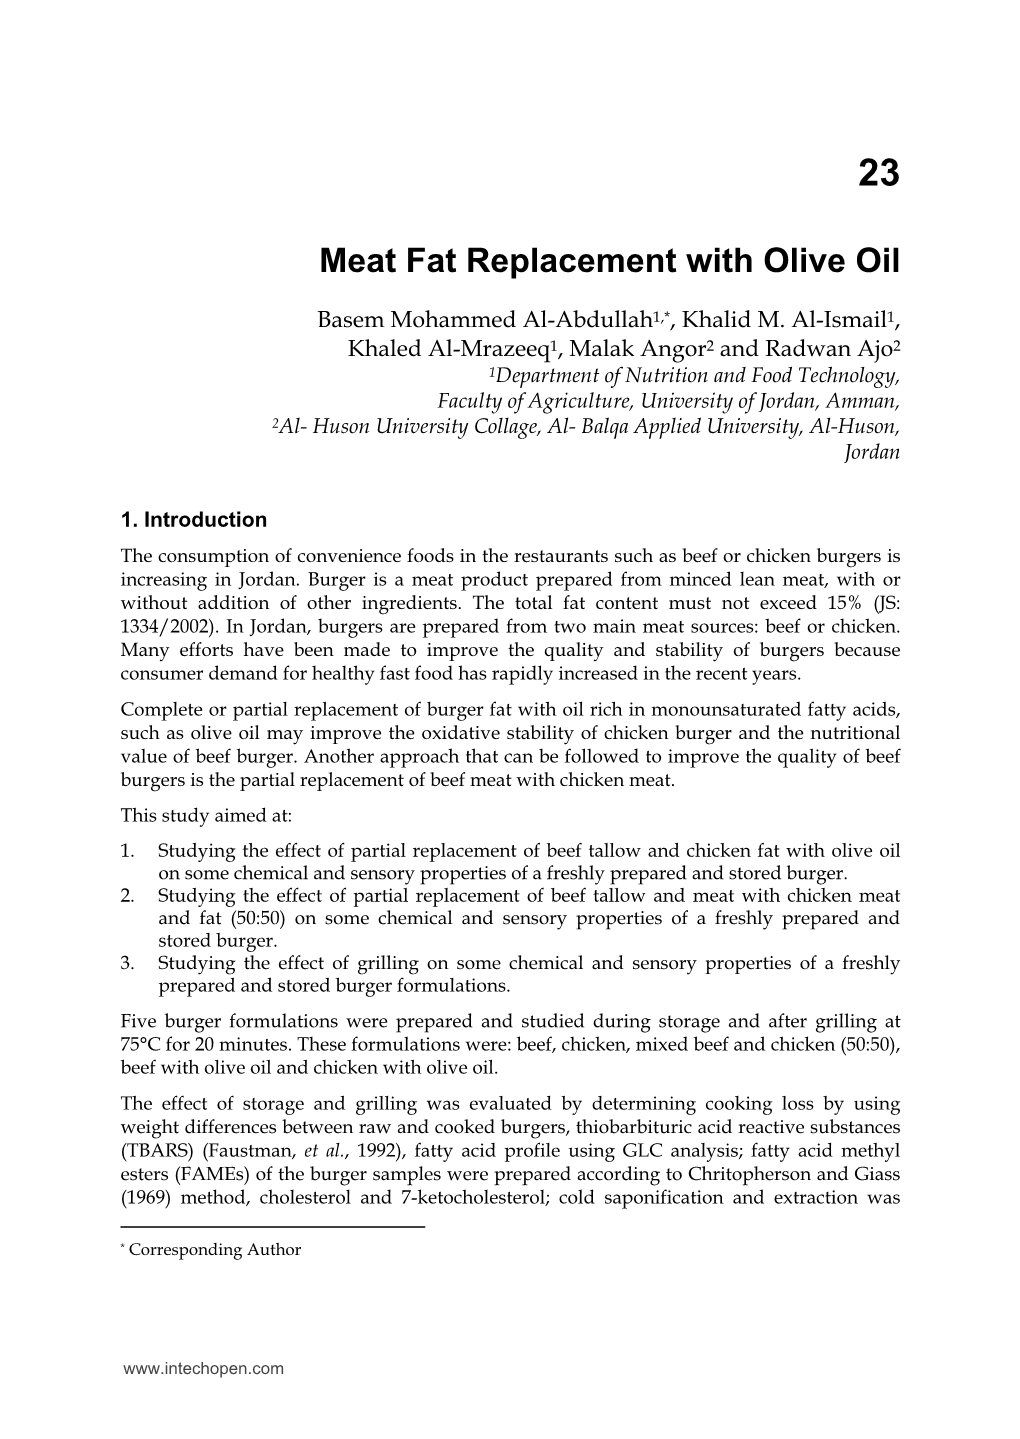 Meat Fat Replacement with Olive Oil